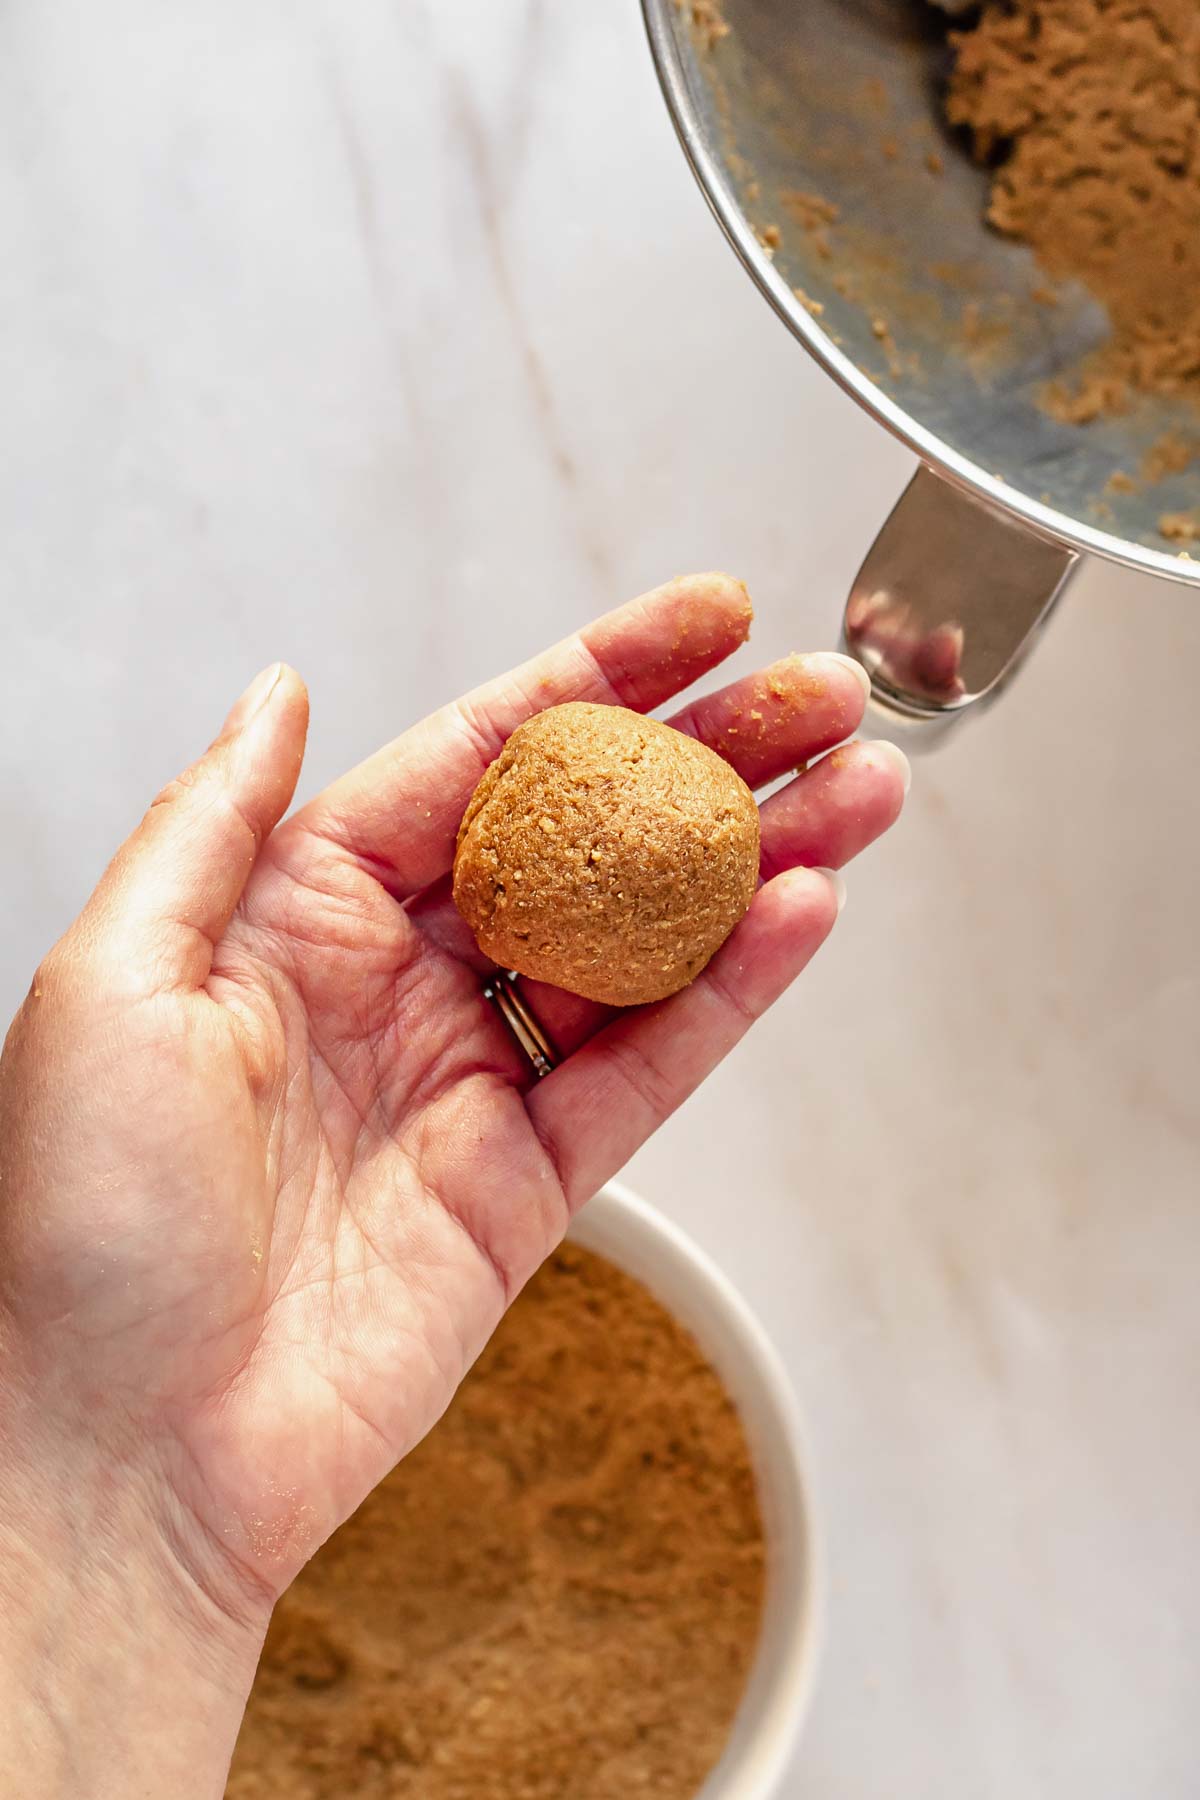 Rolled graham cracker cookie dough ball in a hand.